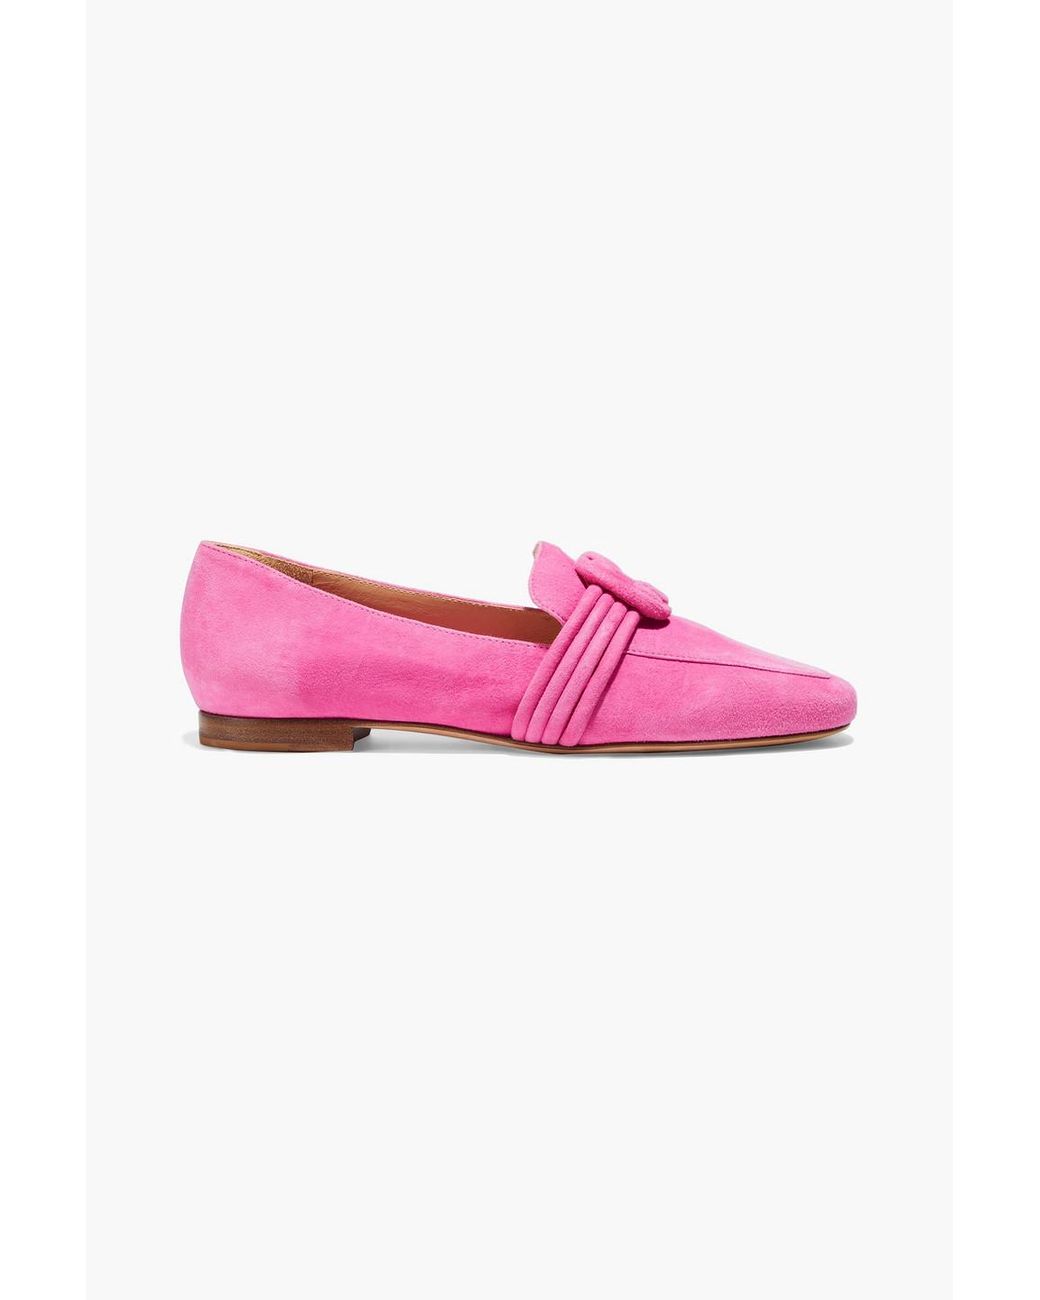 Alexandre Birman Vicky Knotted Suede Loafers in Pink | Lyst